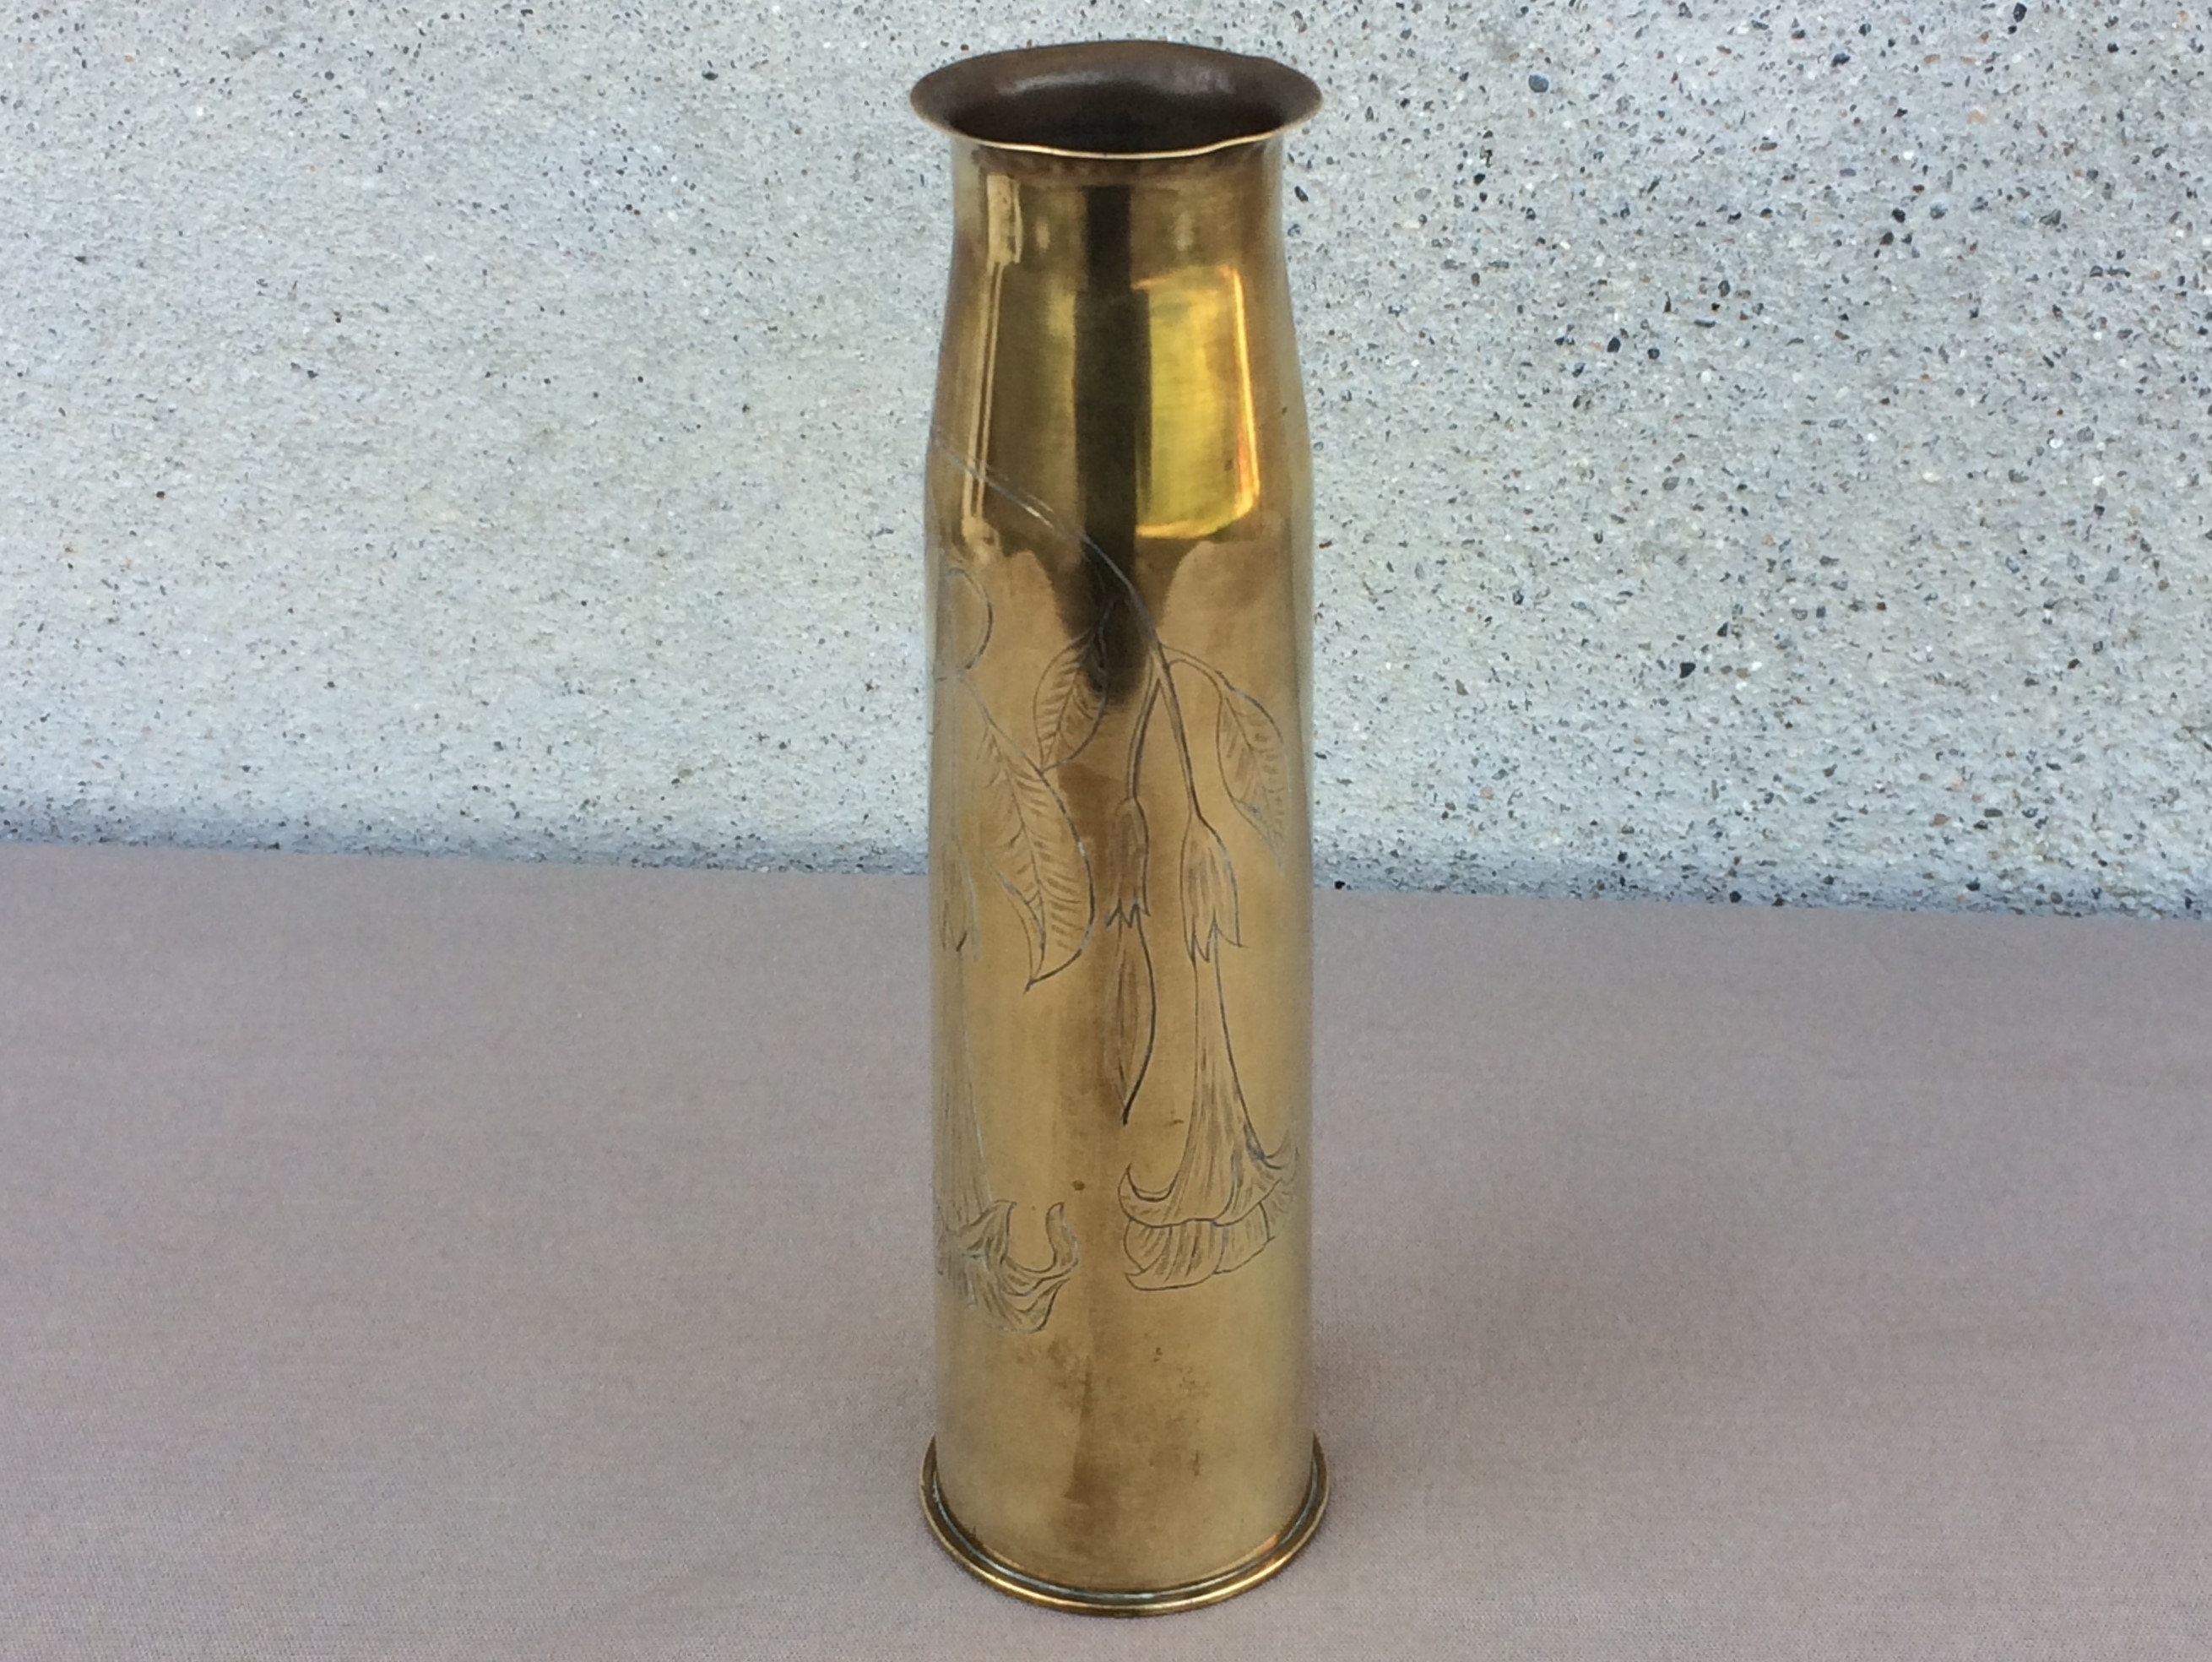 40mm Bofors Shell Casing – Tales from the Supply Depot